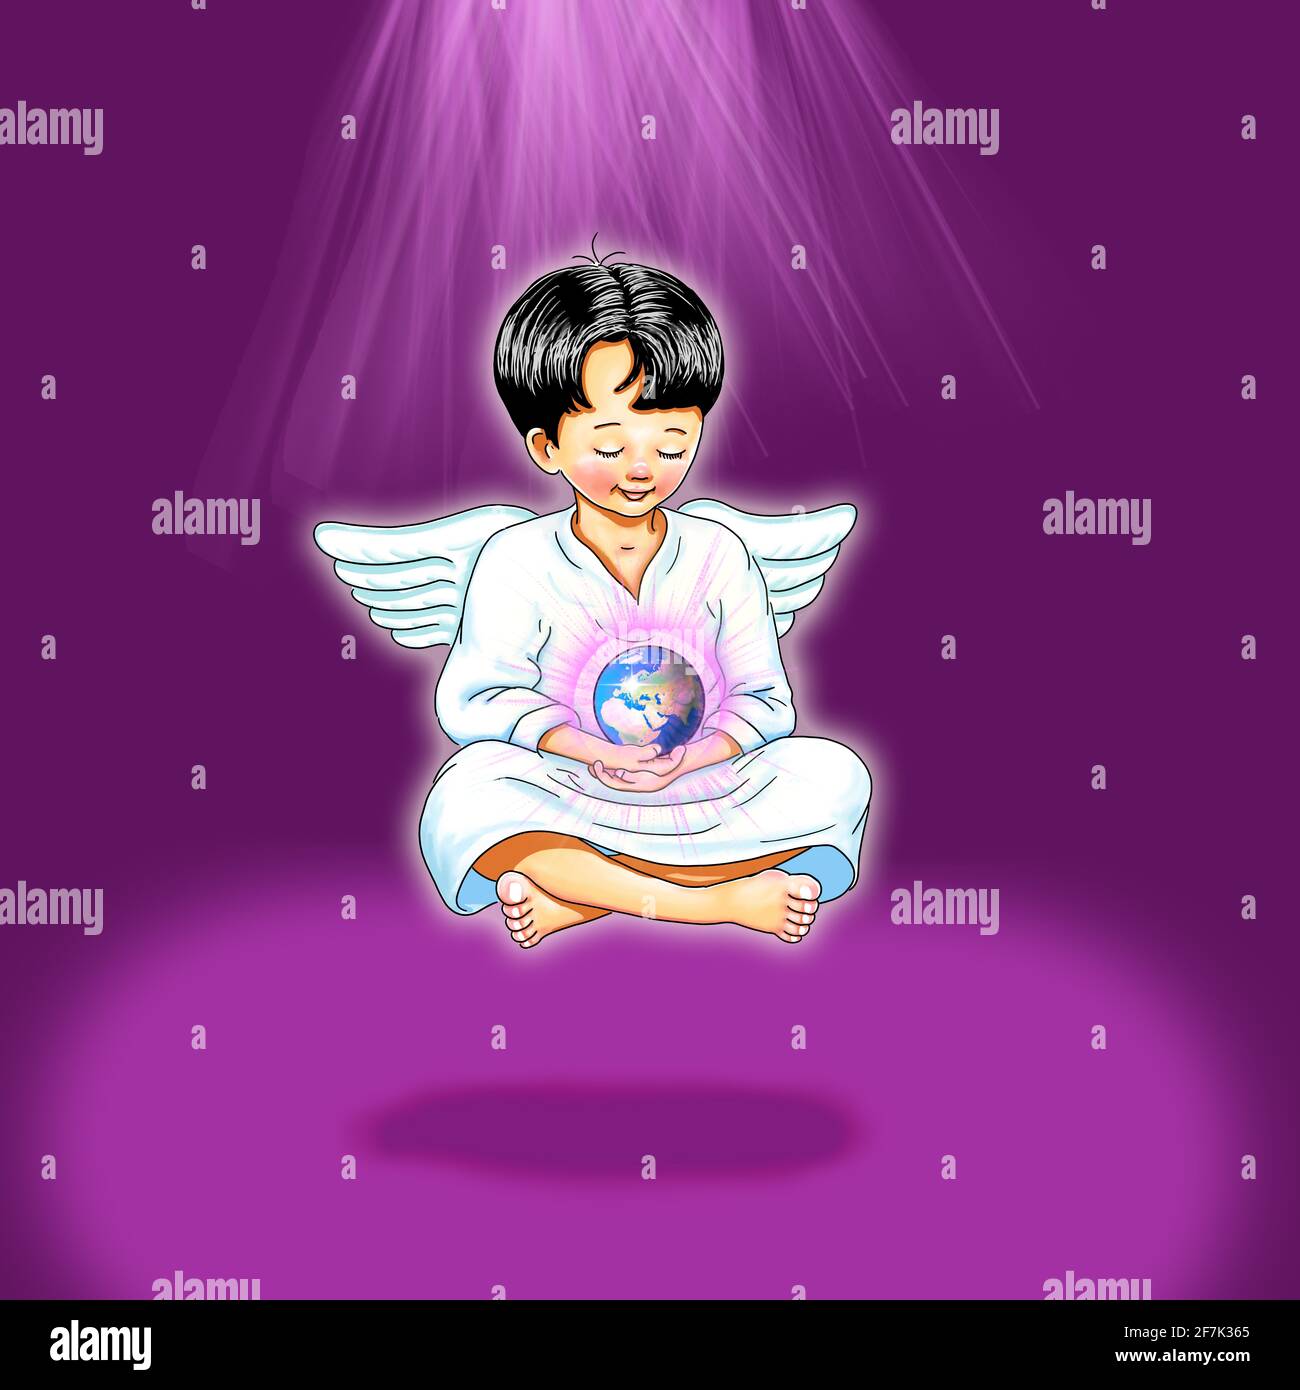 Angel barefoot Elohim archangel protector energy lightworker love floats meditation holds new earth in hand smiles smile joy earth globe shines pink Stock Photo